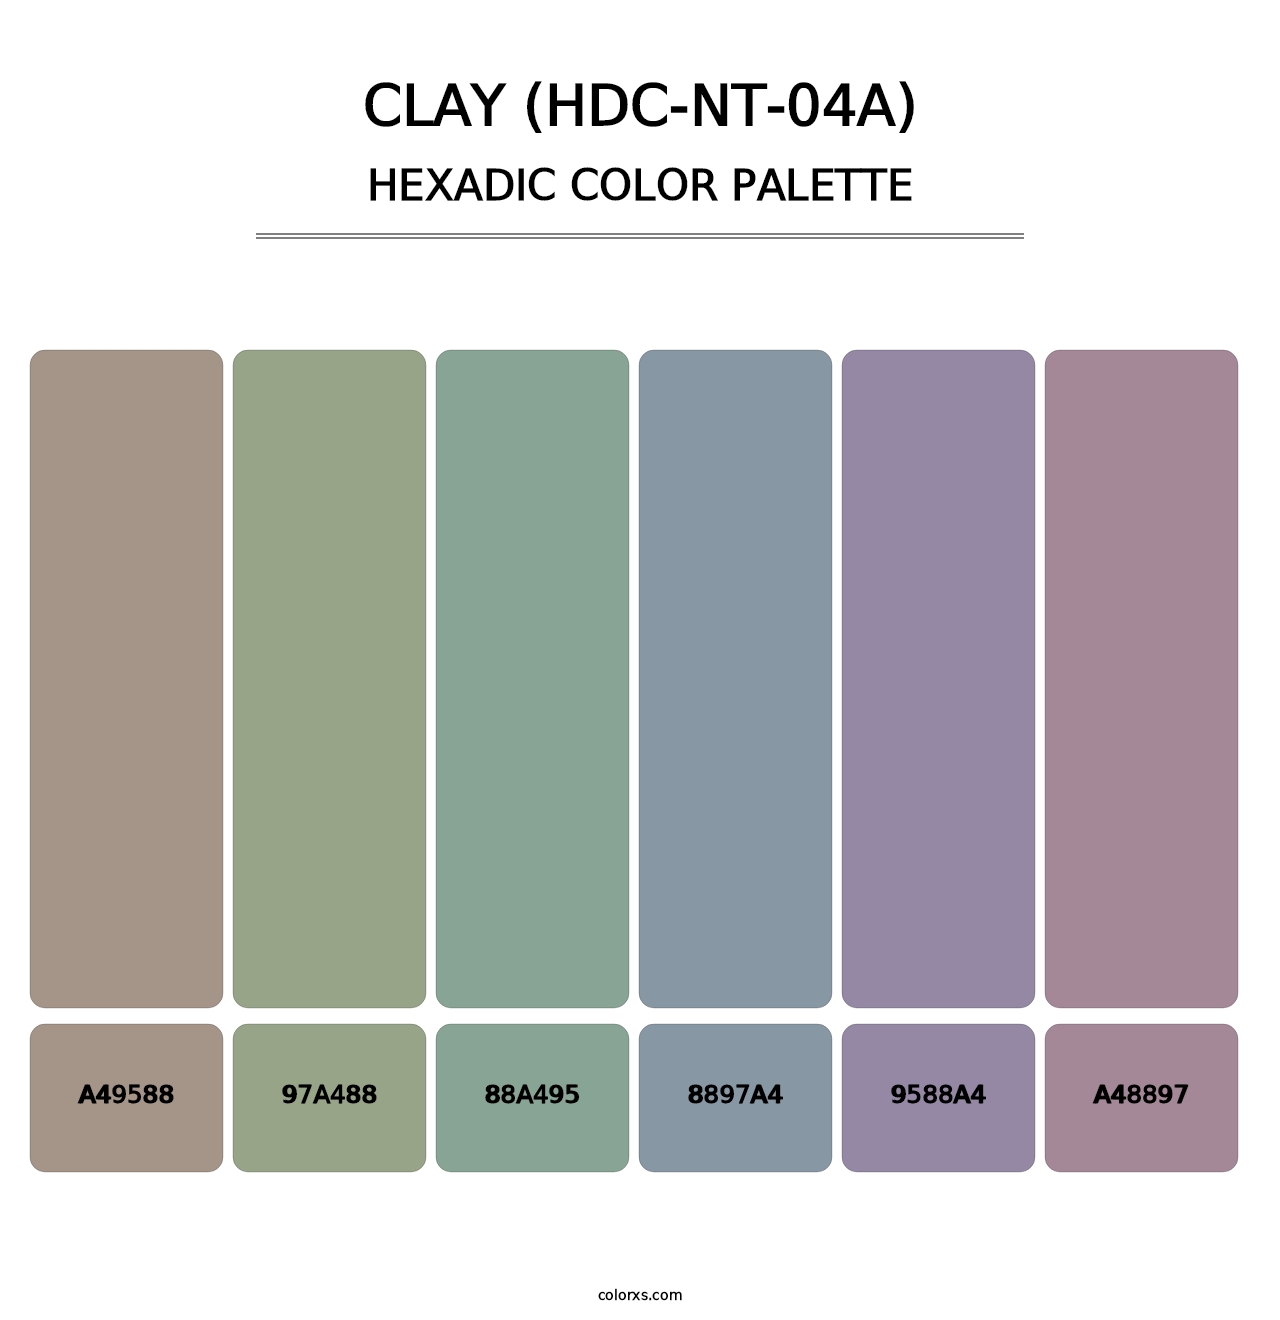 Clay (HDC-NT-04A) - Hexadic Color Palette